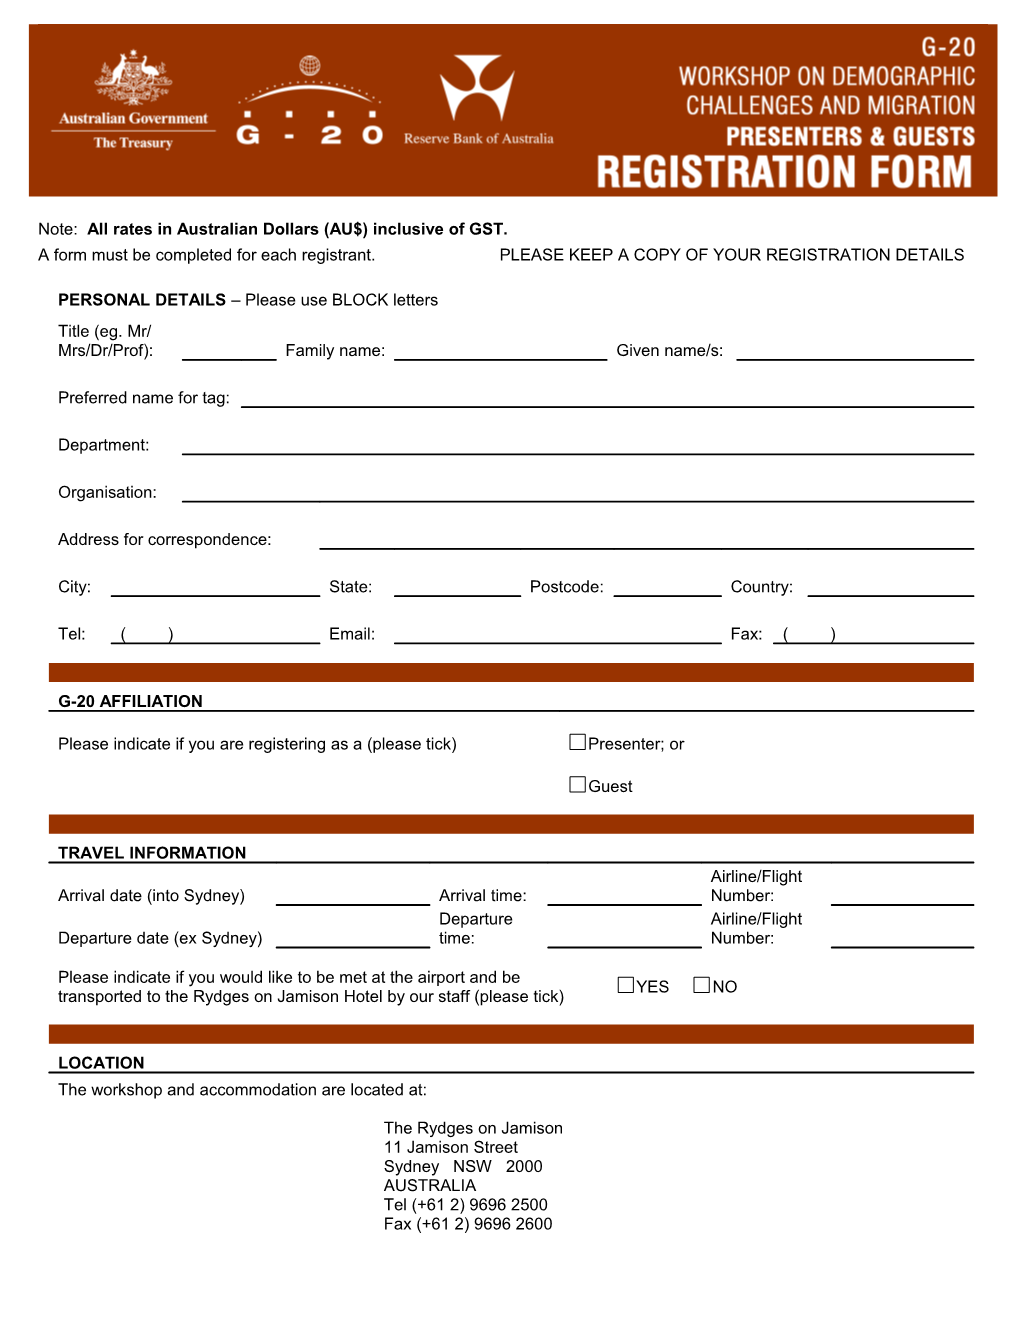 Registration Form (Presenters and Guests)